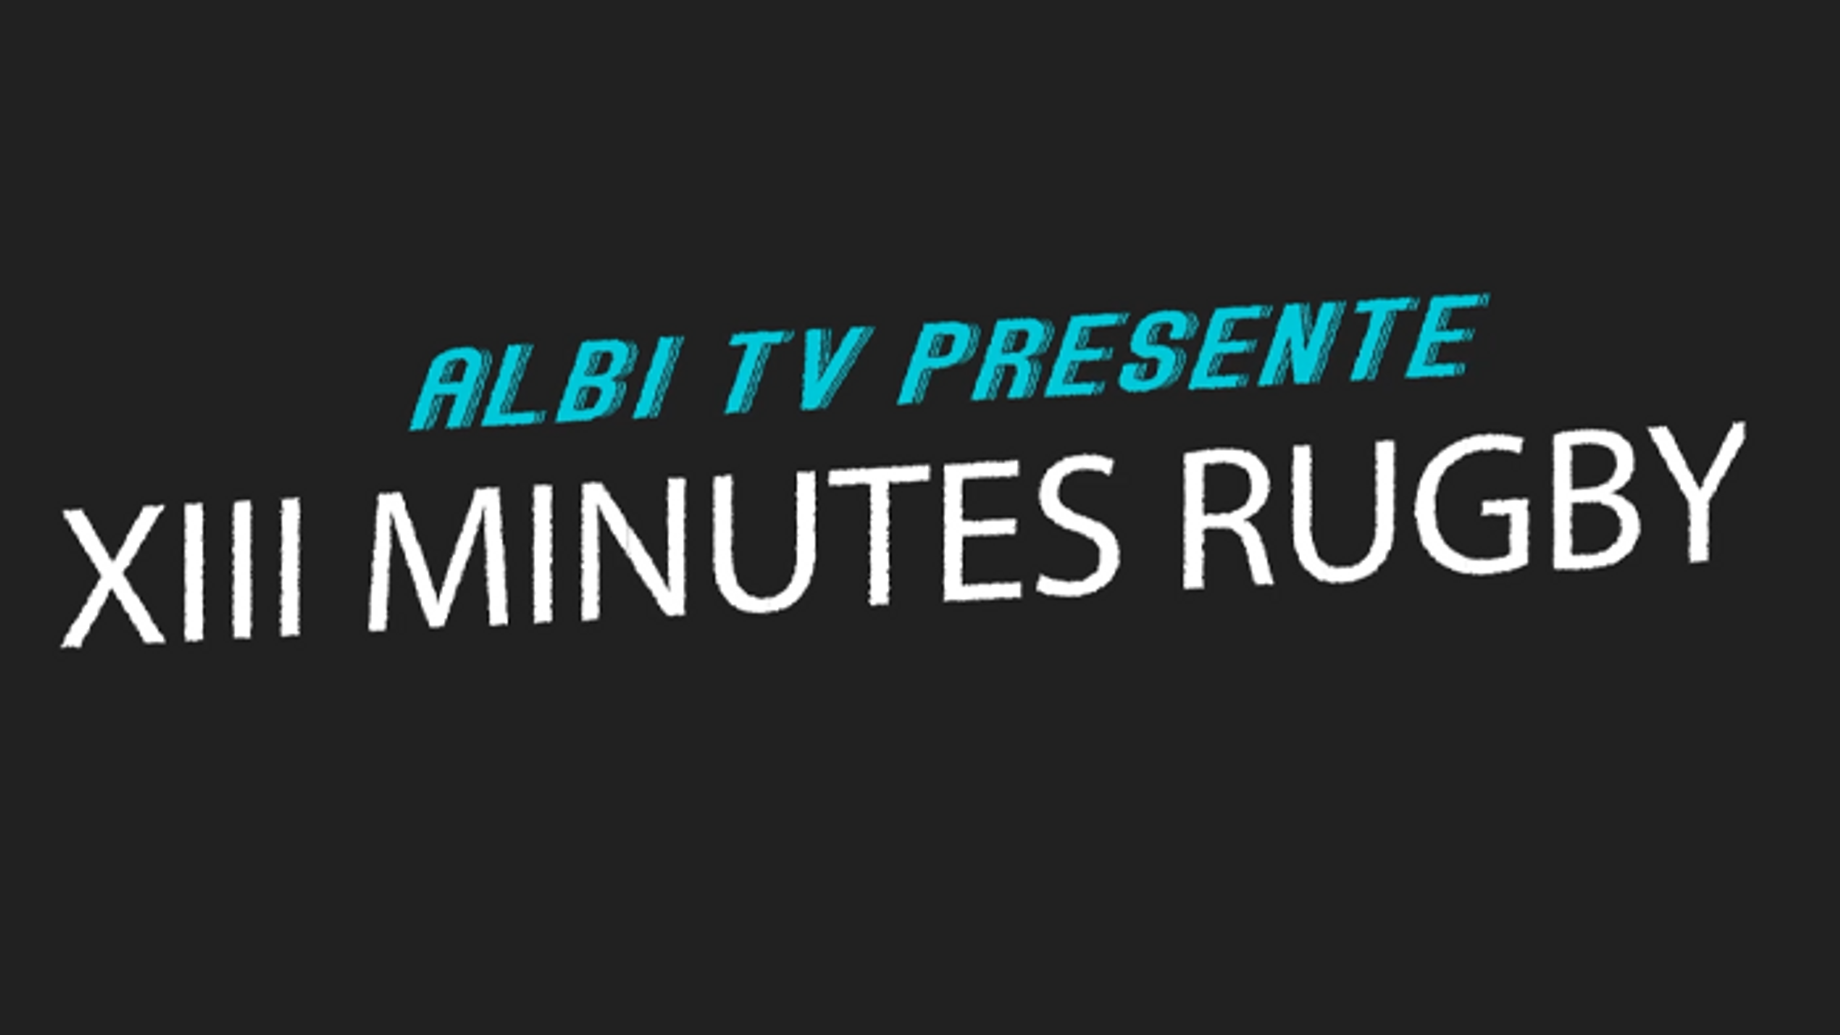 XIII minutes rugby